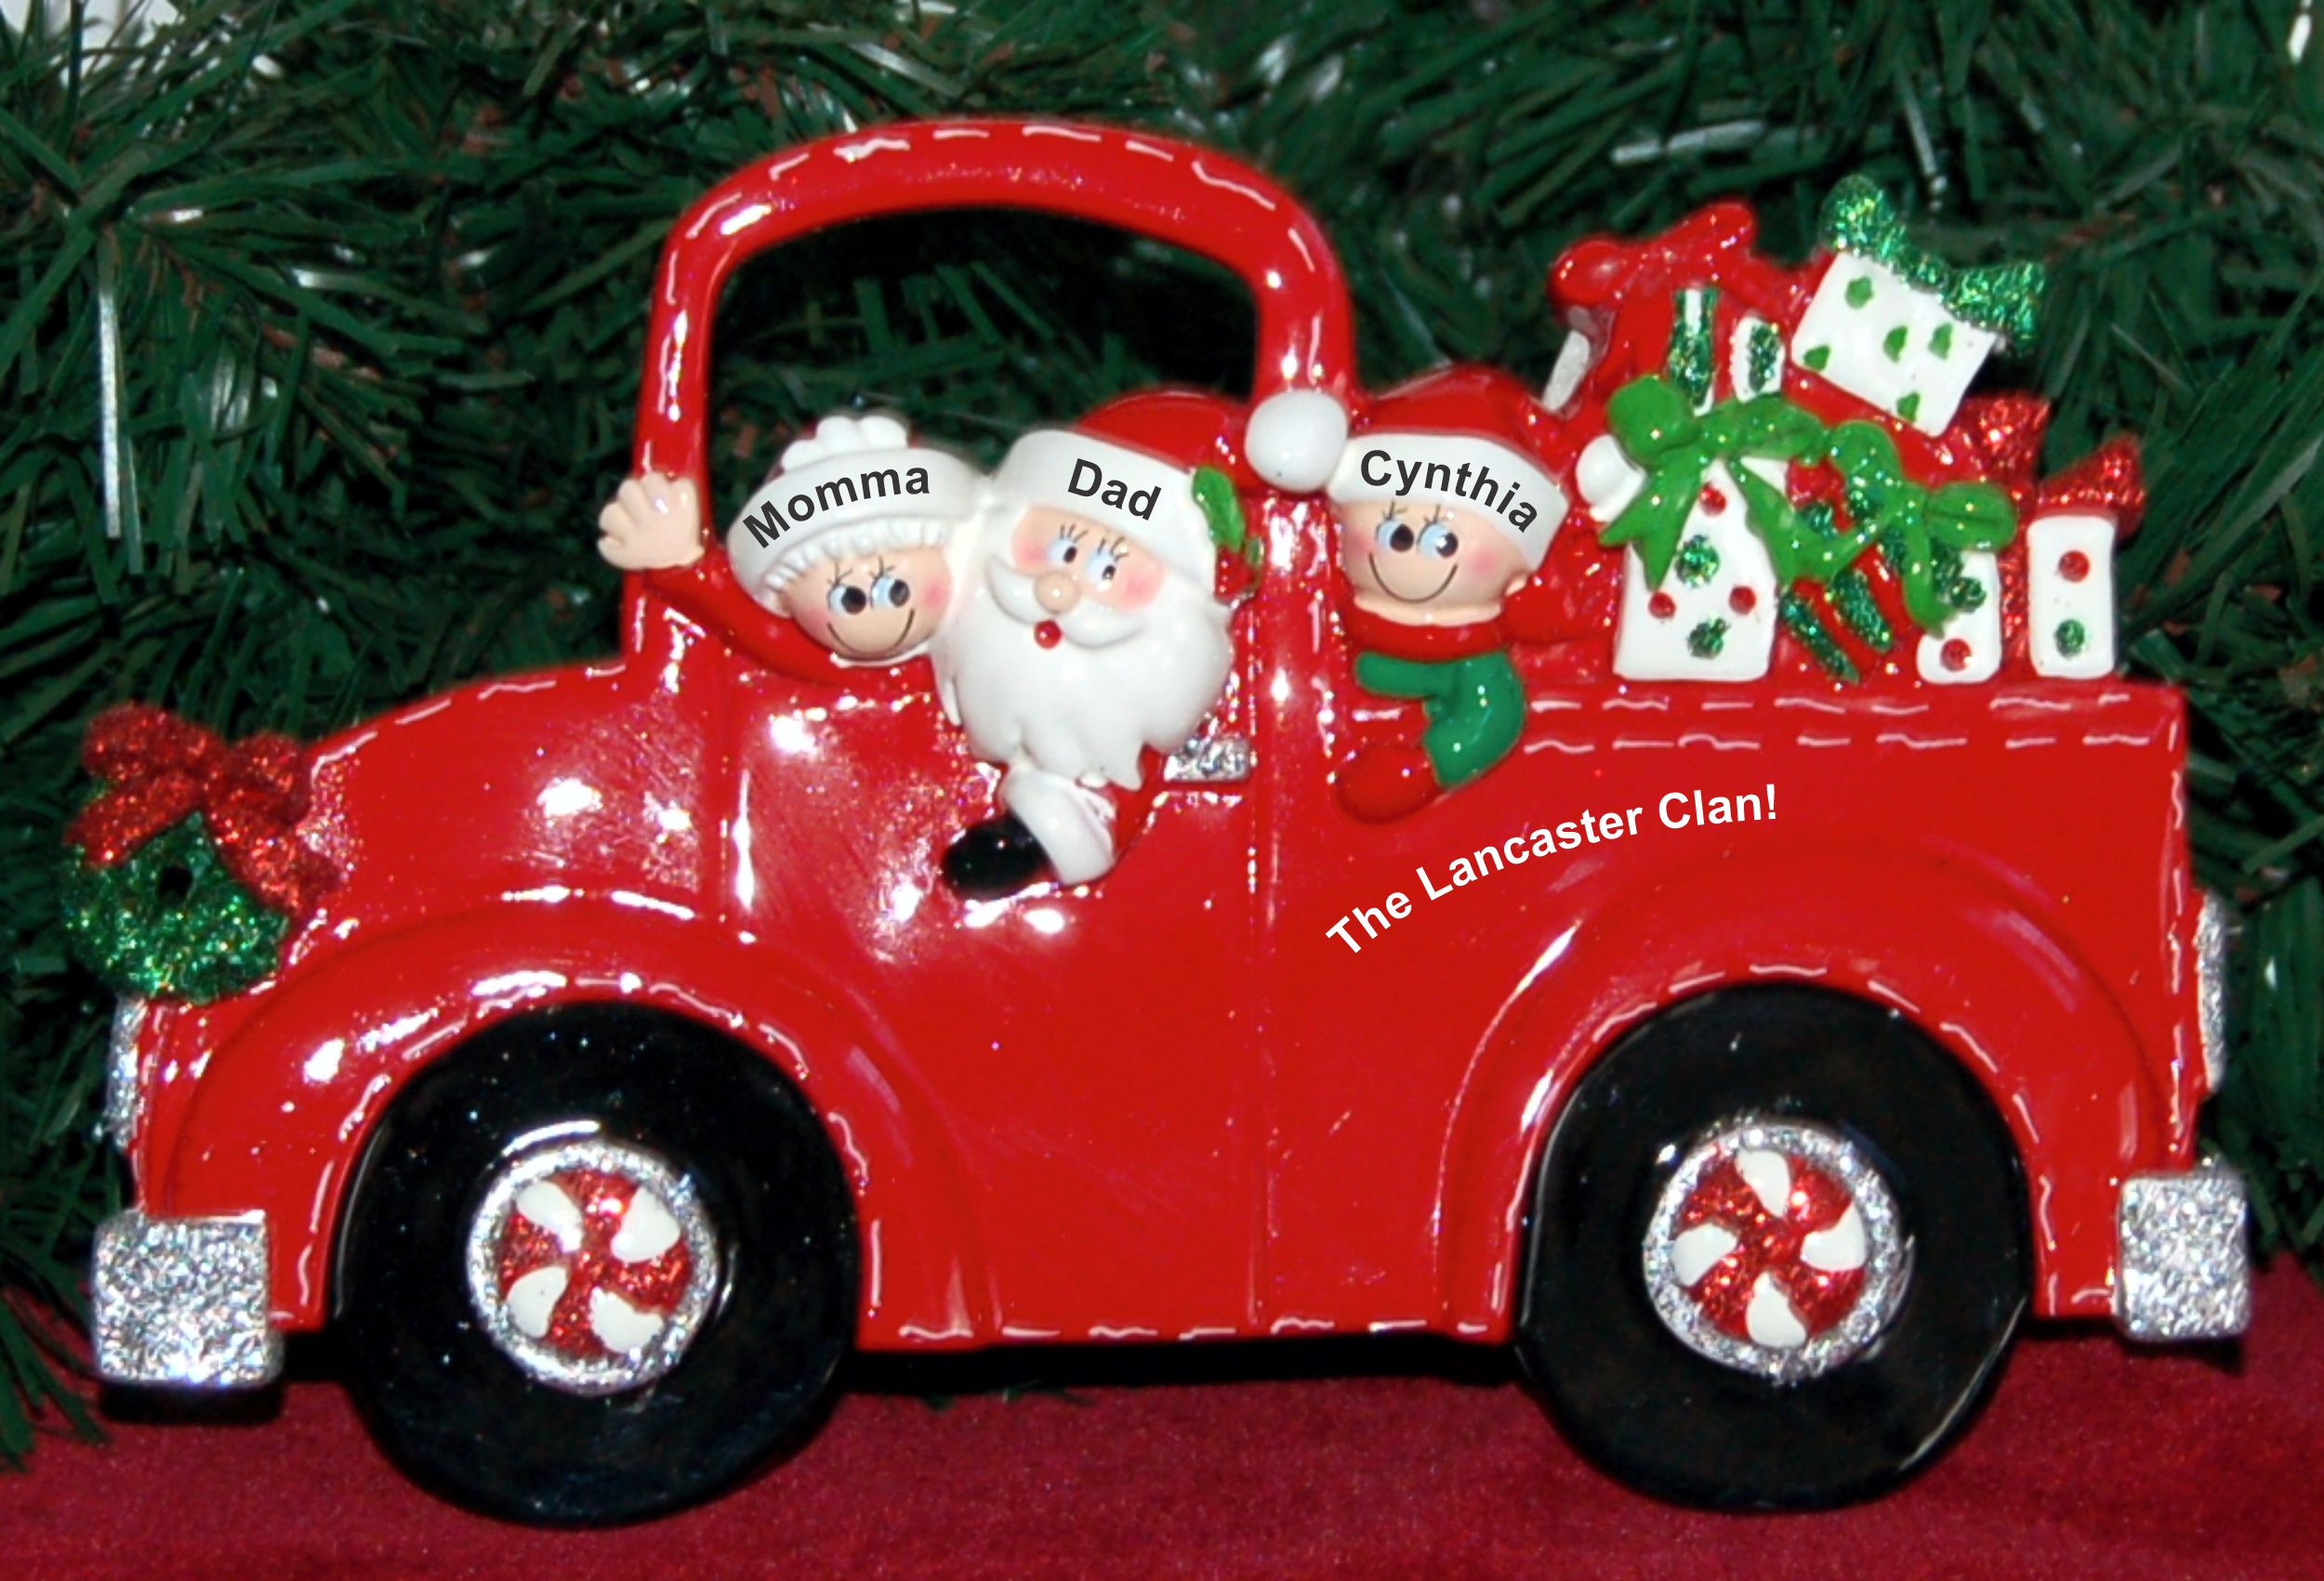 Family Tabletop Christmas Decoration Fire Engine for 3 Personalized by RussellRhodes.com